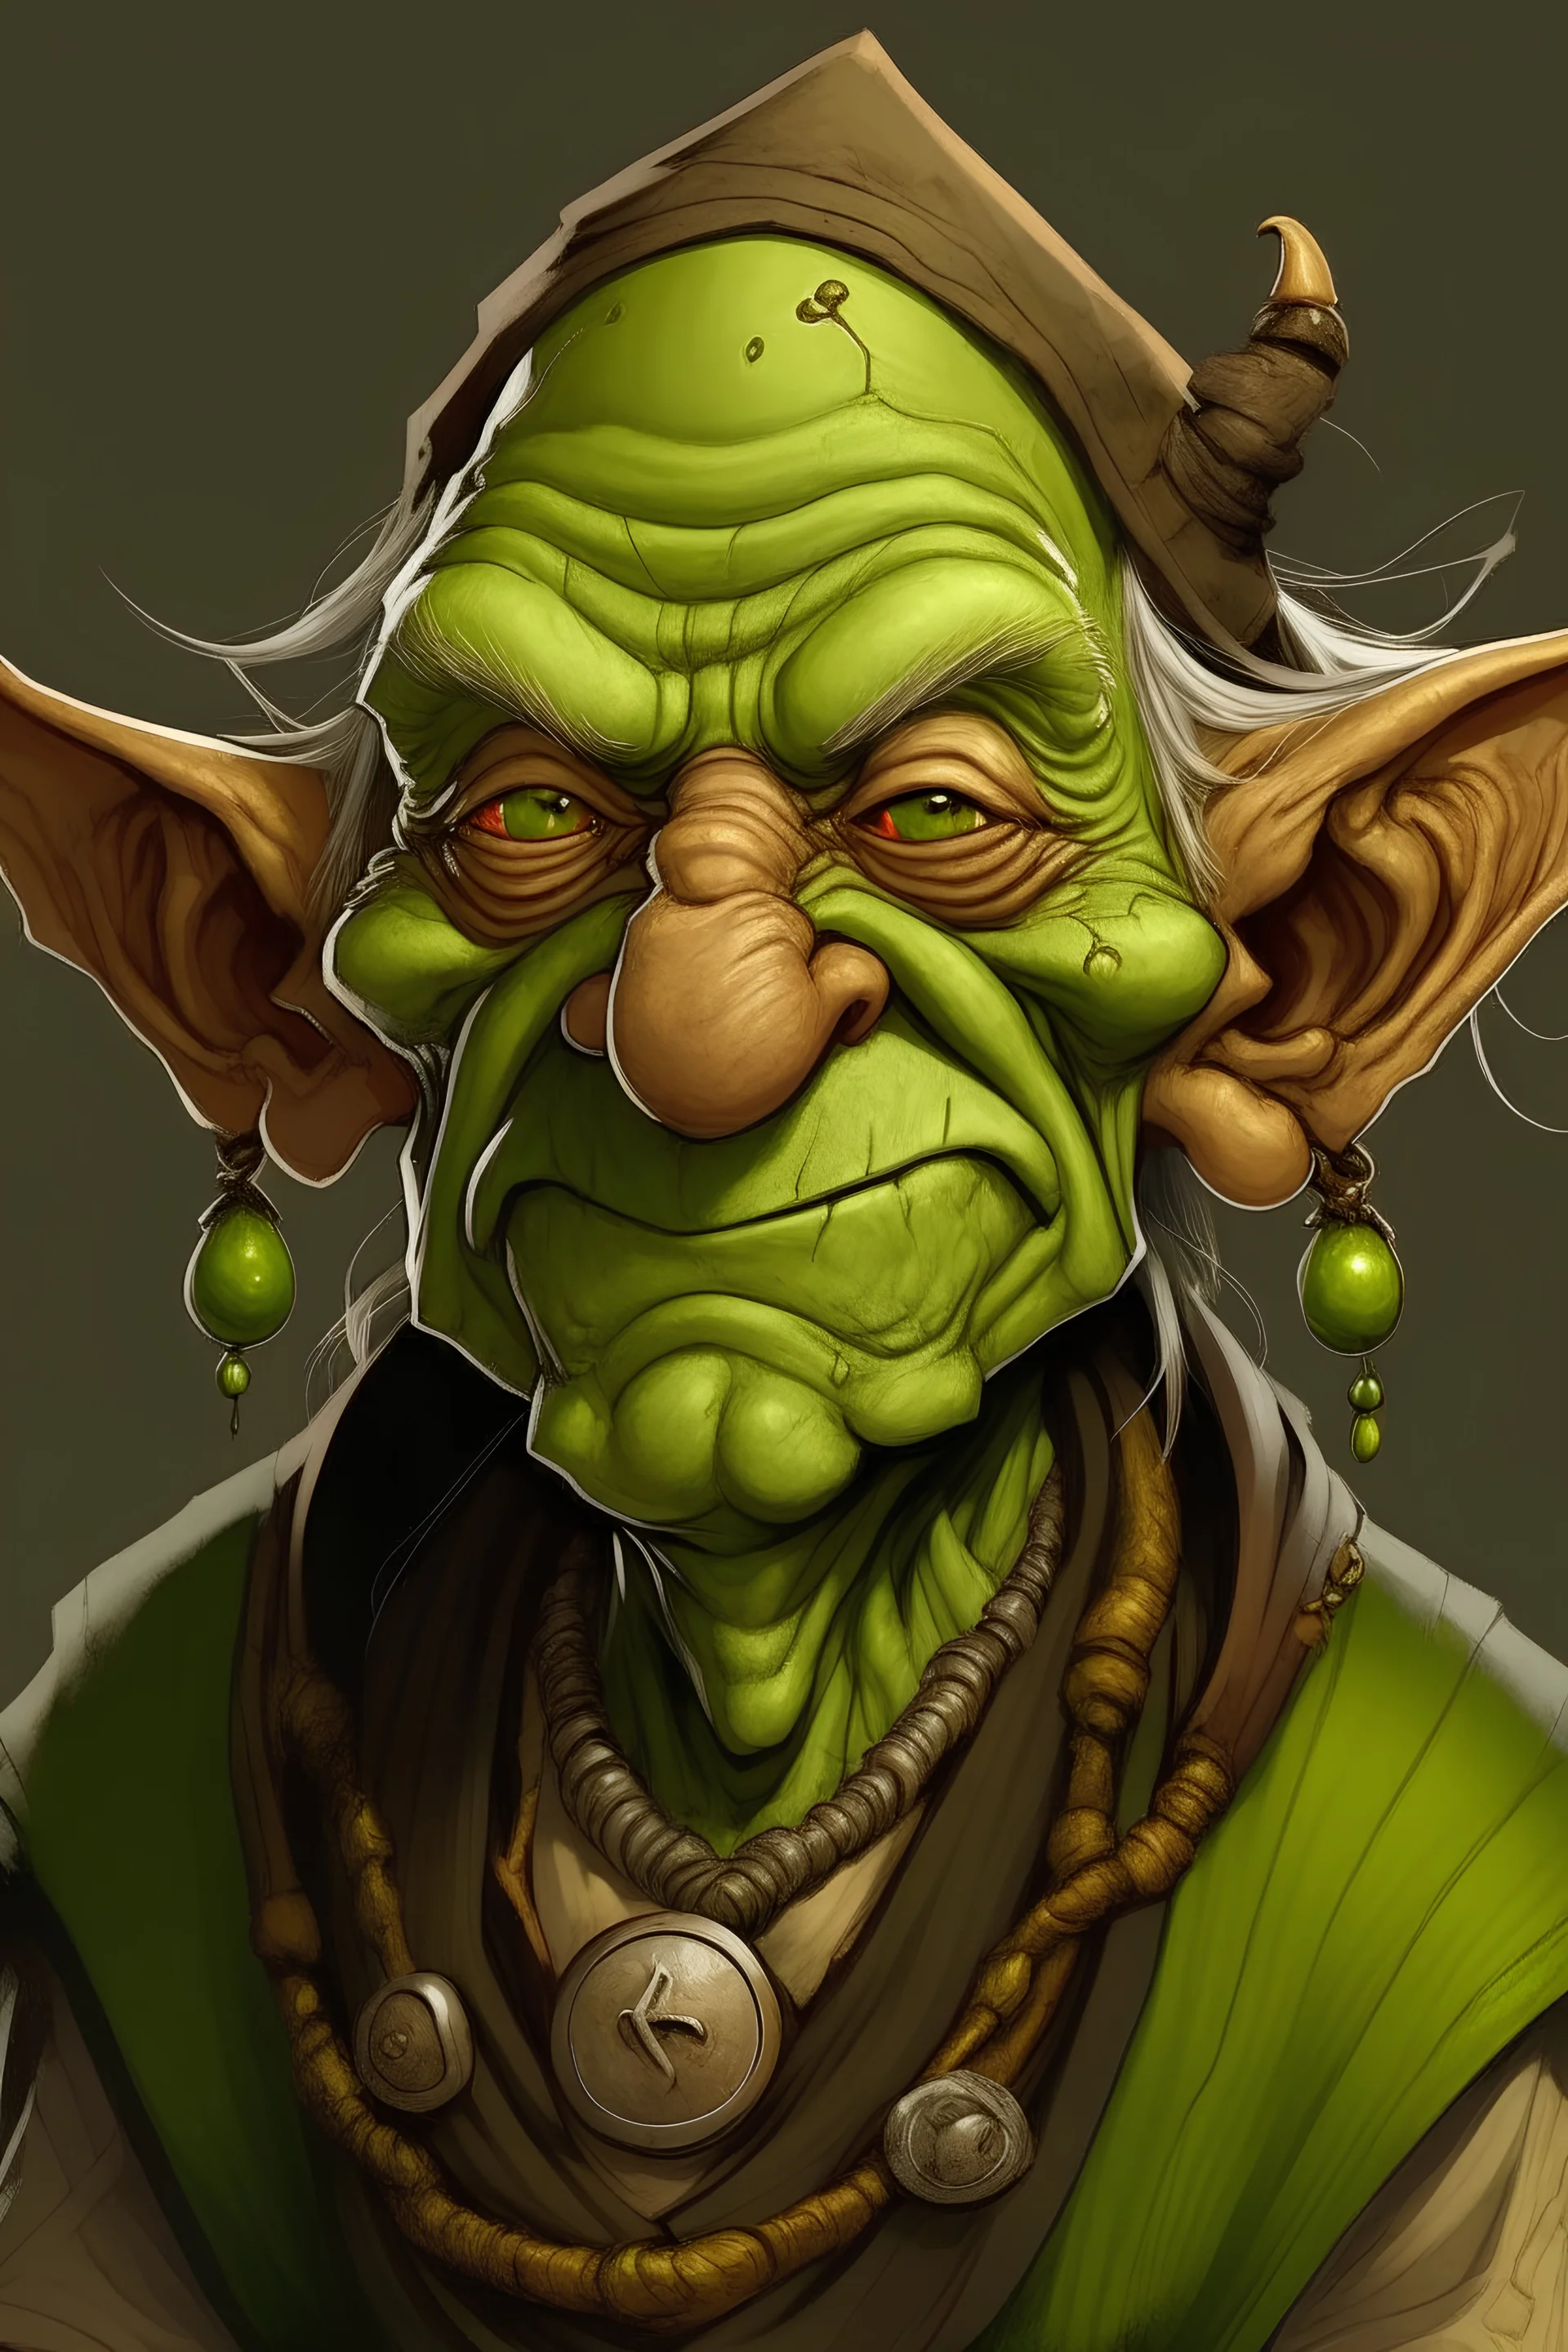 older goblin farmer with green and gold skin that is deeply wrinkled with a few earrings and other piercings.